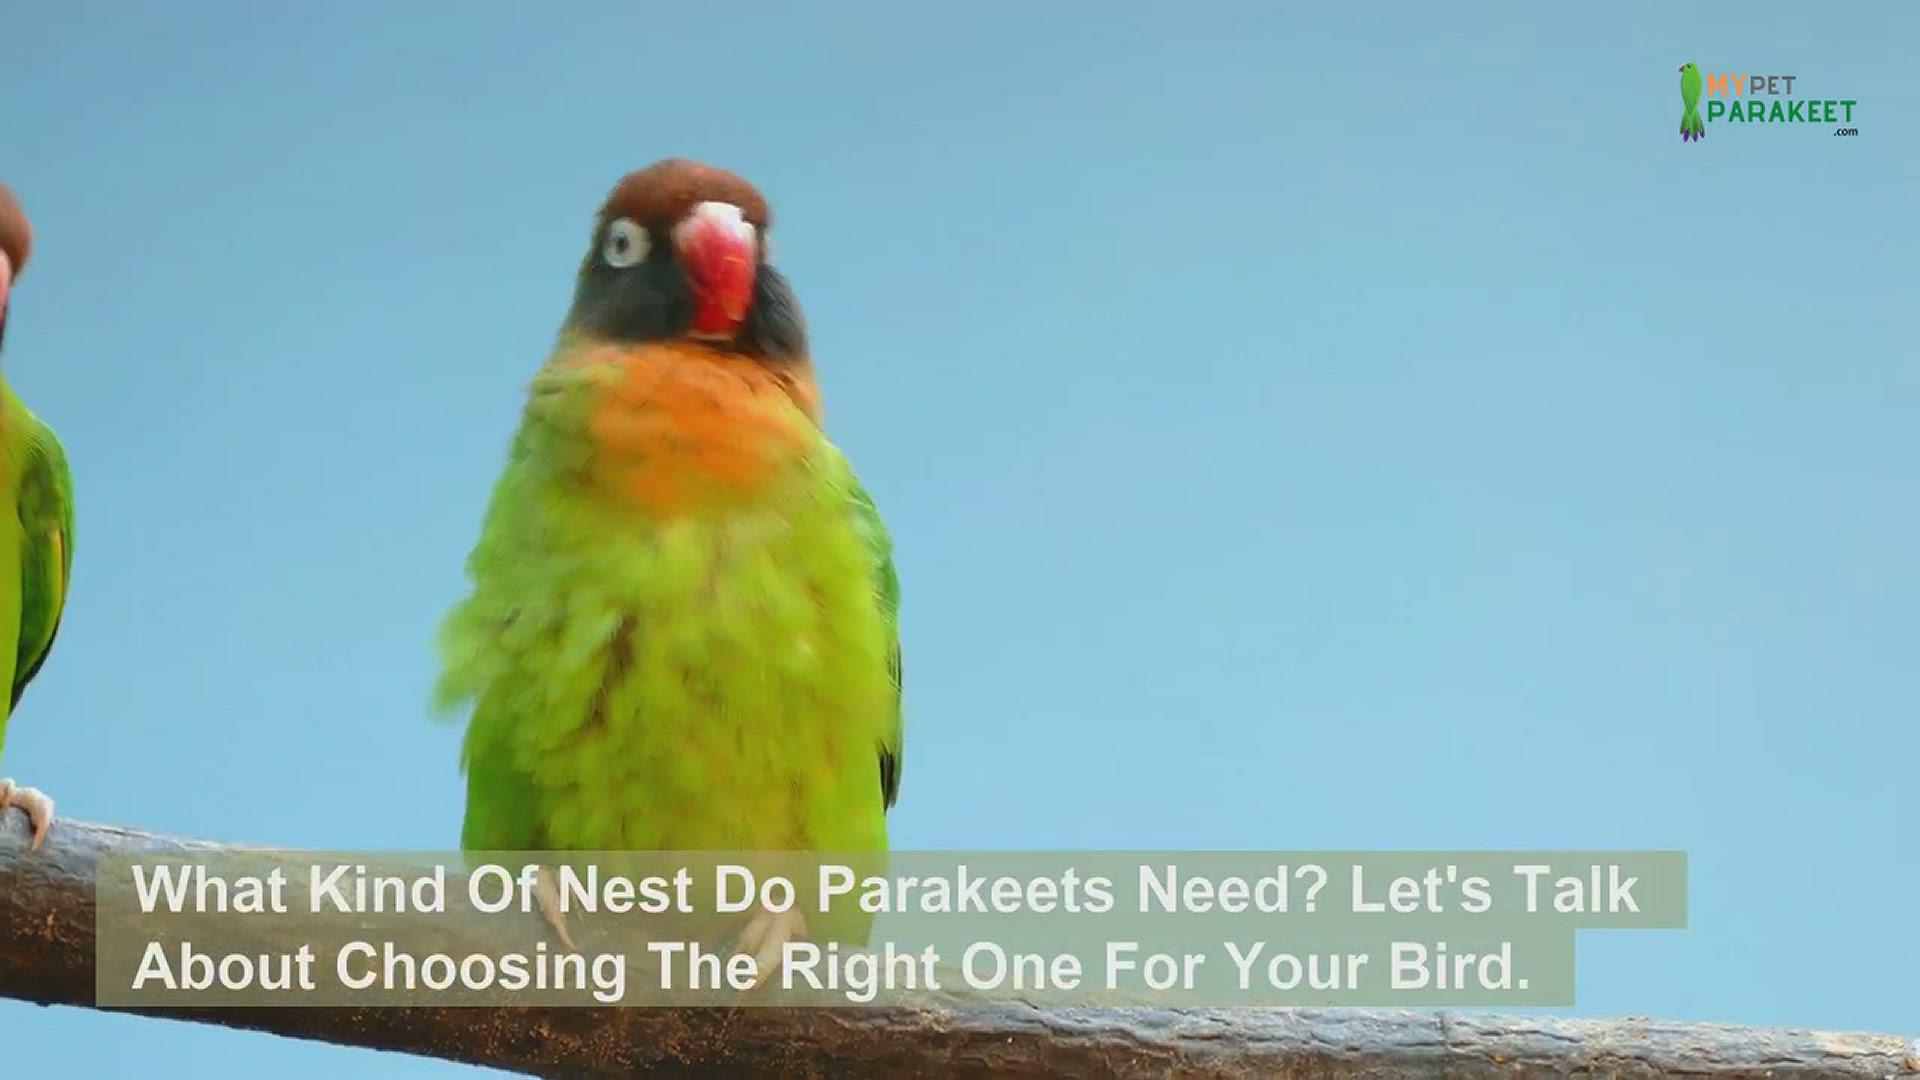 'Video thumbnail for What Kind Of Nest Do Parakeets Need? Choosing The Right One'